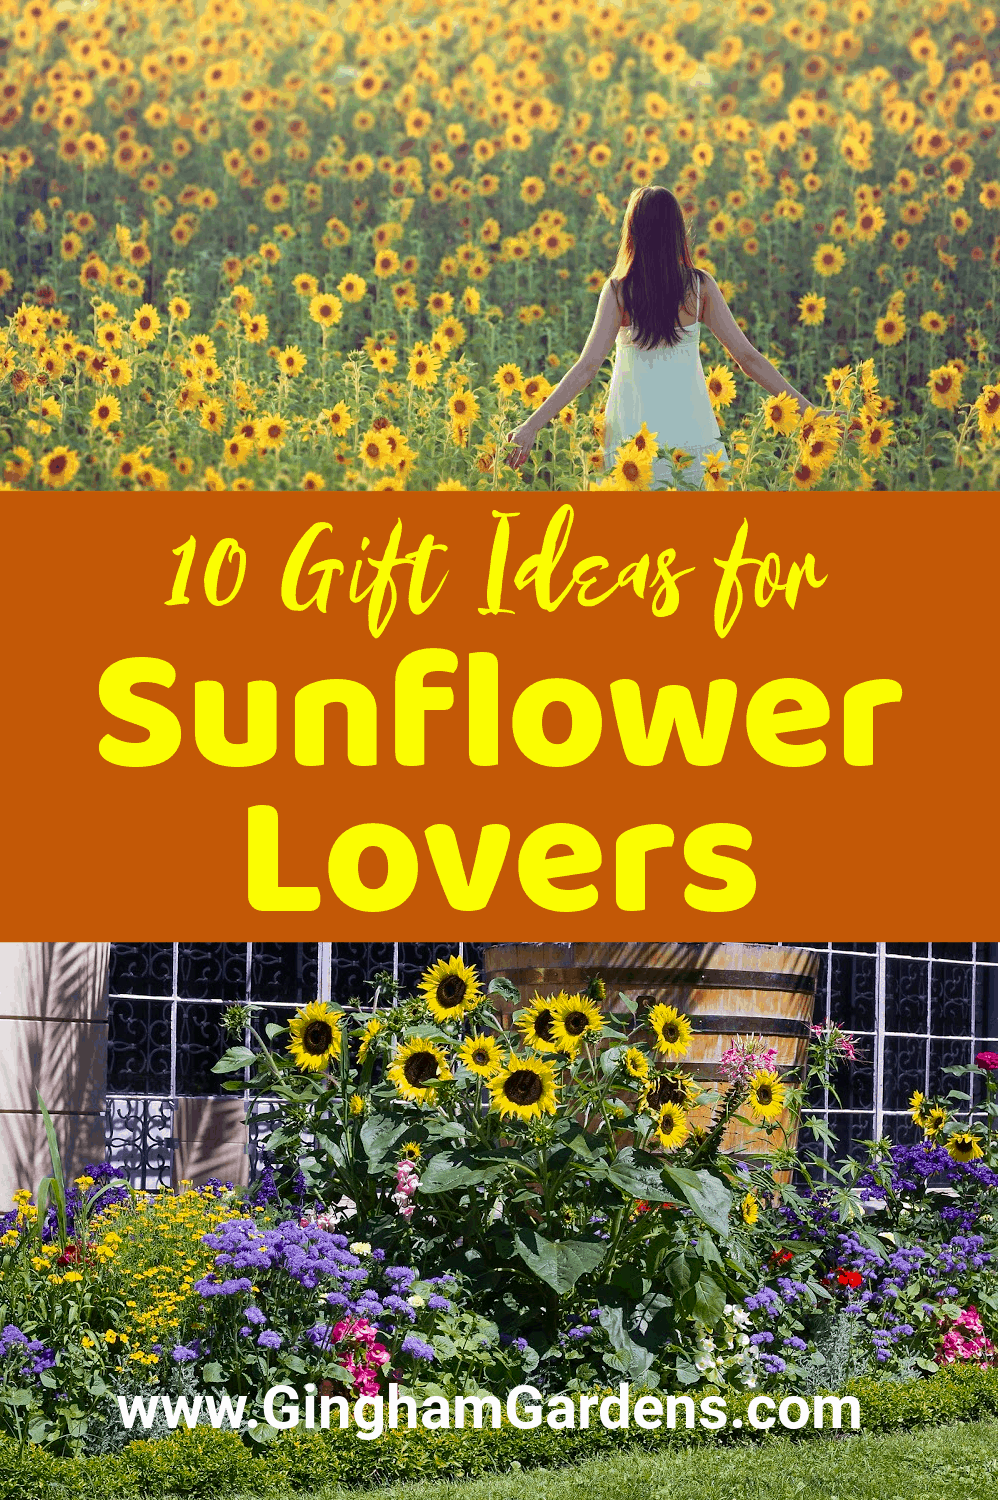 Images of Sunflower Gardens with Text Overlay - 10 Gift Ideas for Sunflower Lovers